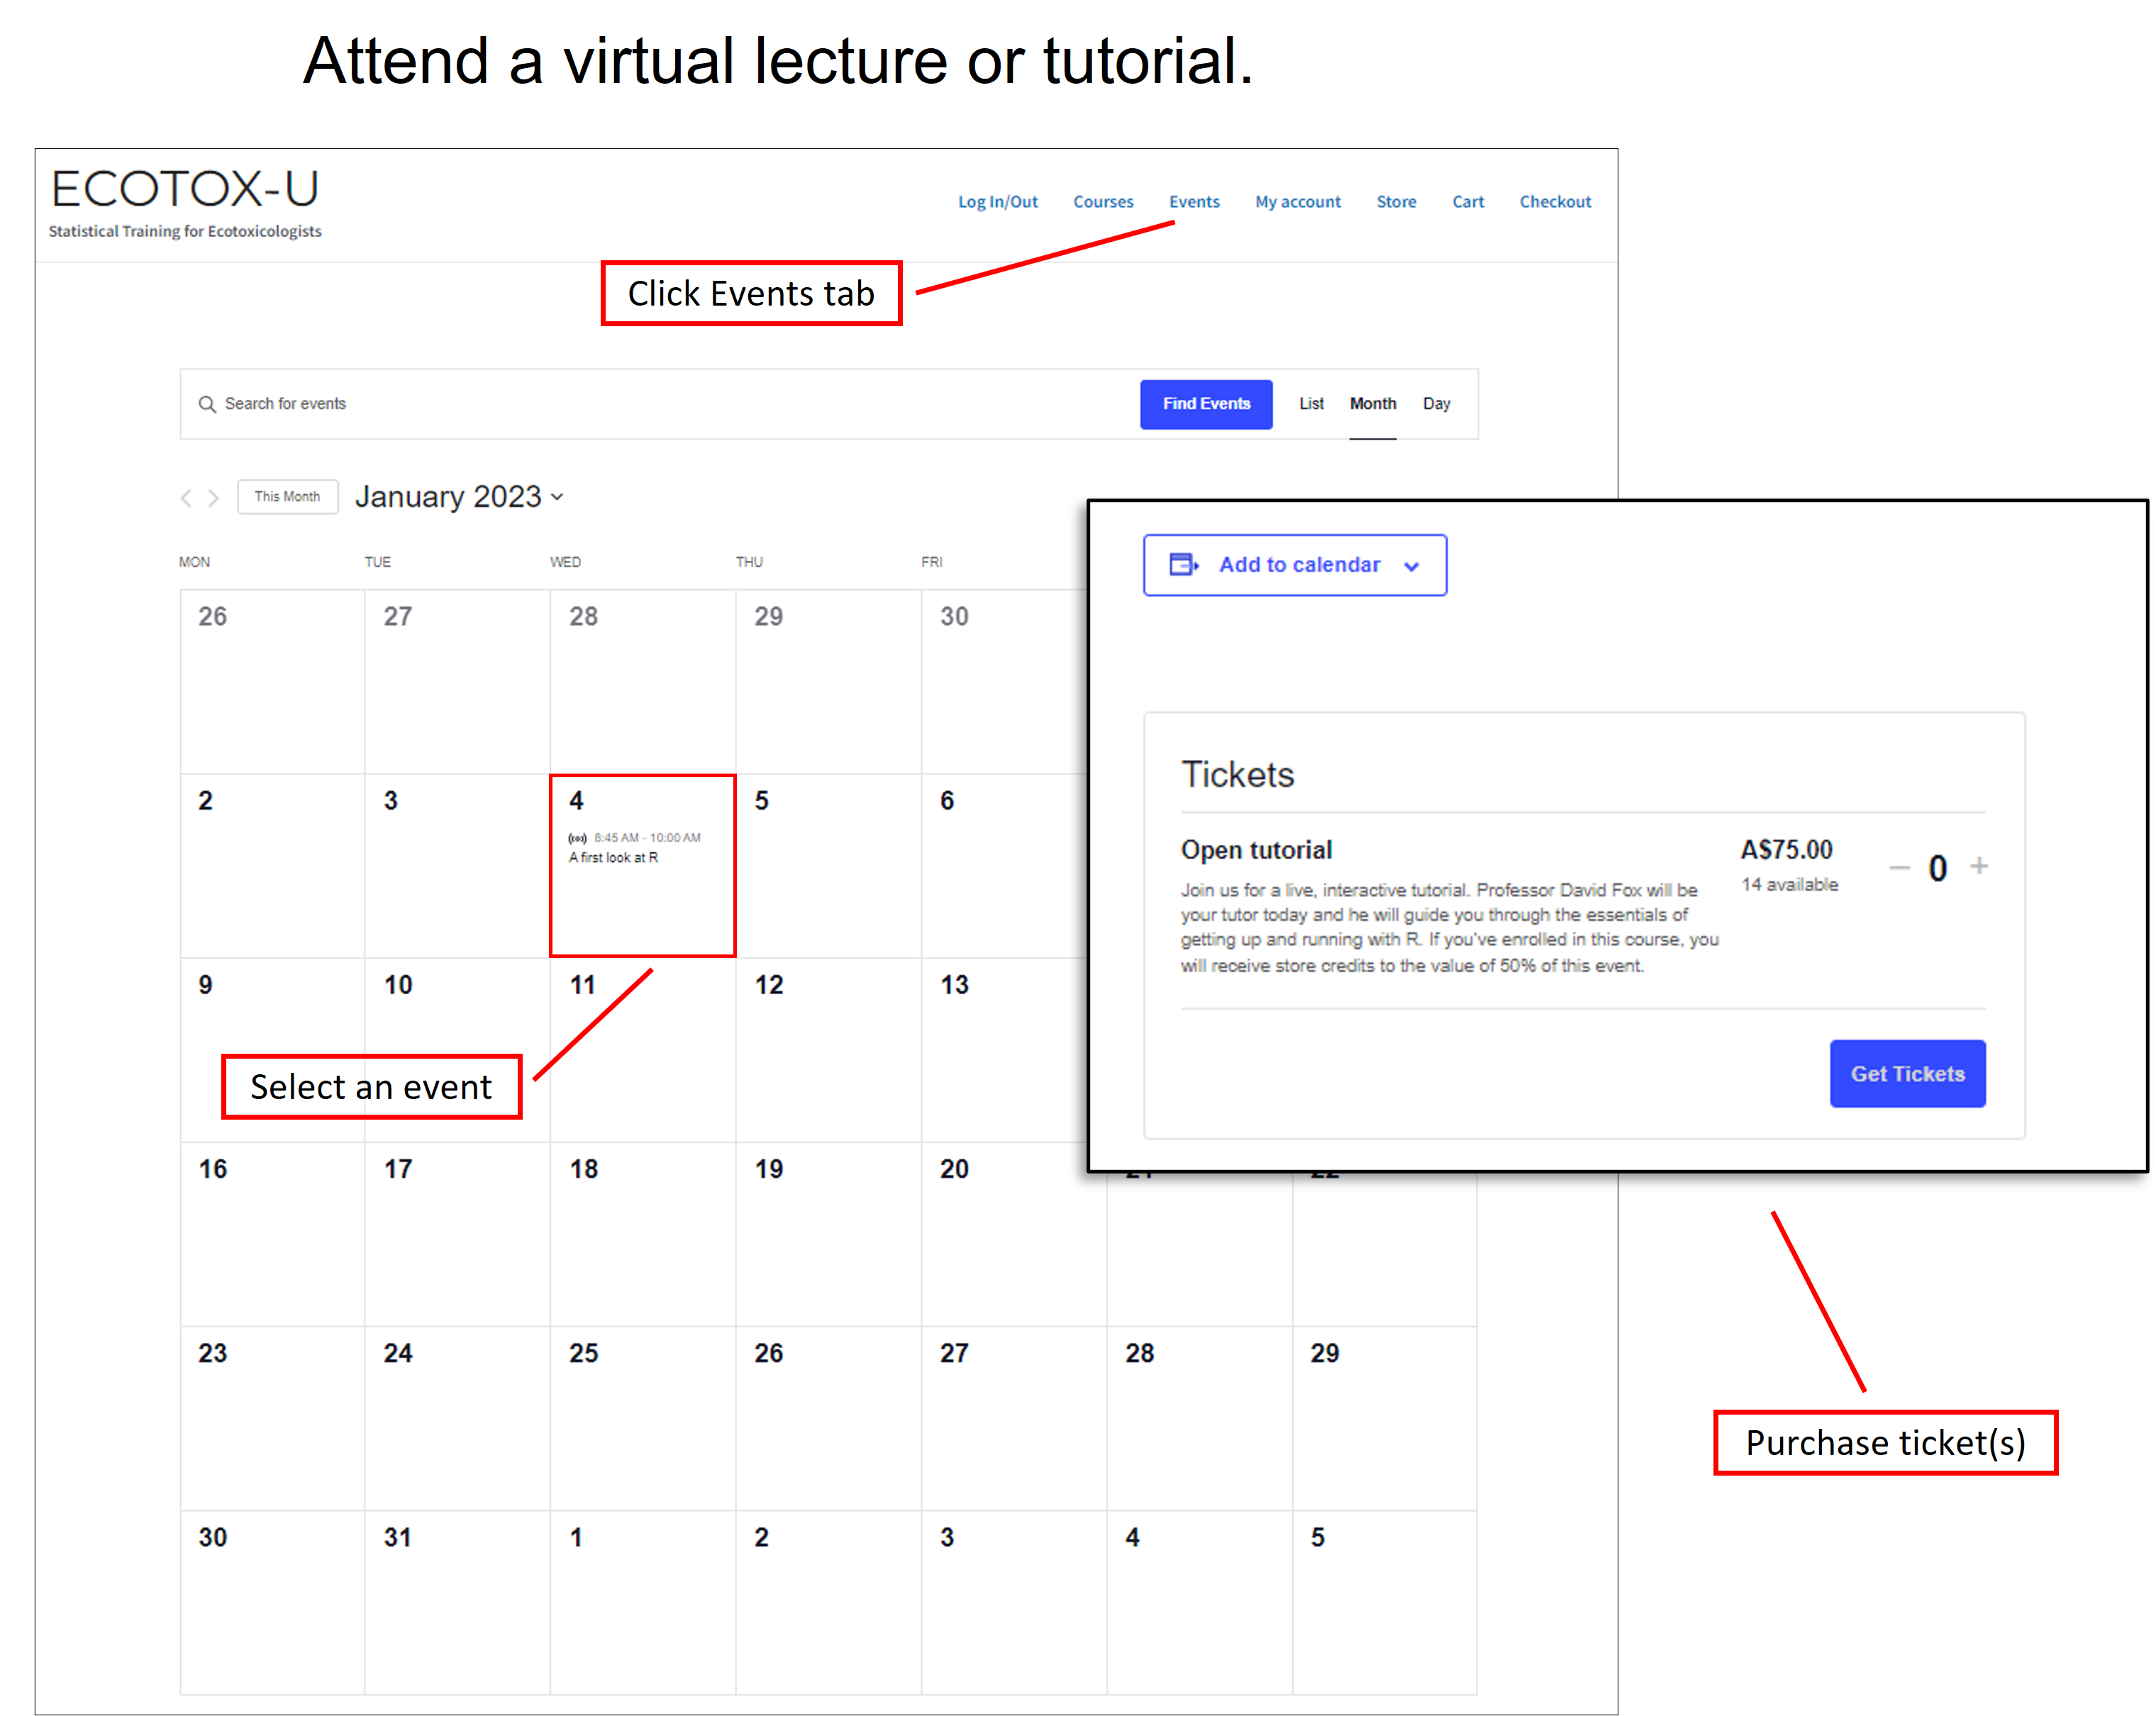 Virtual lectures